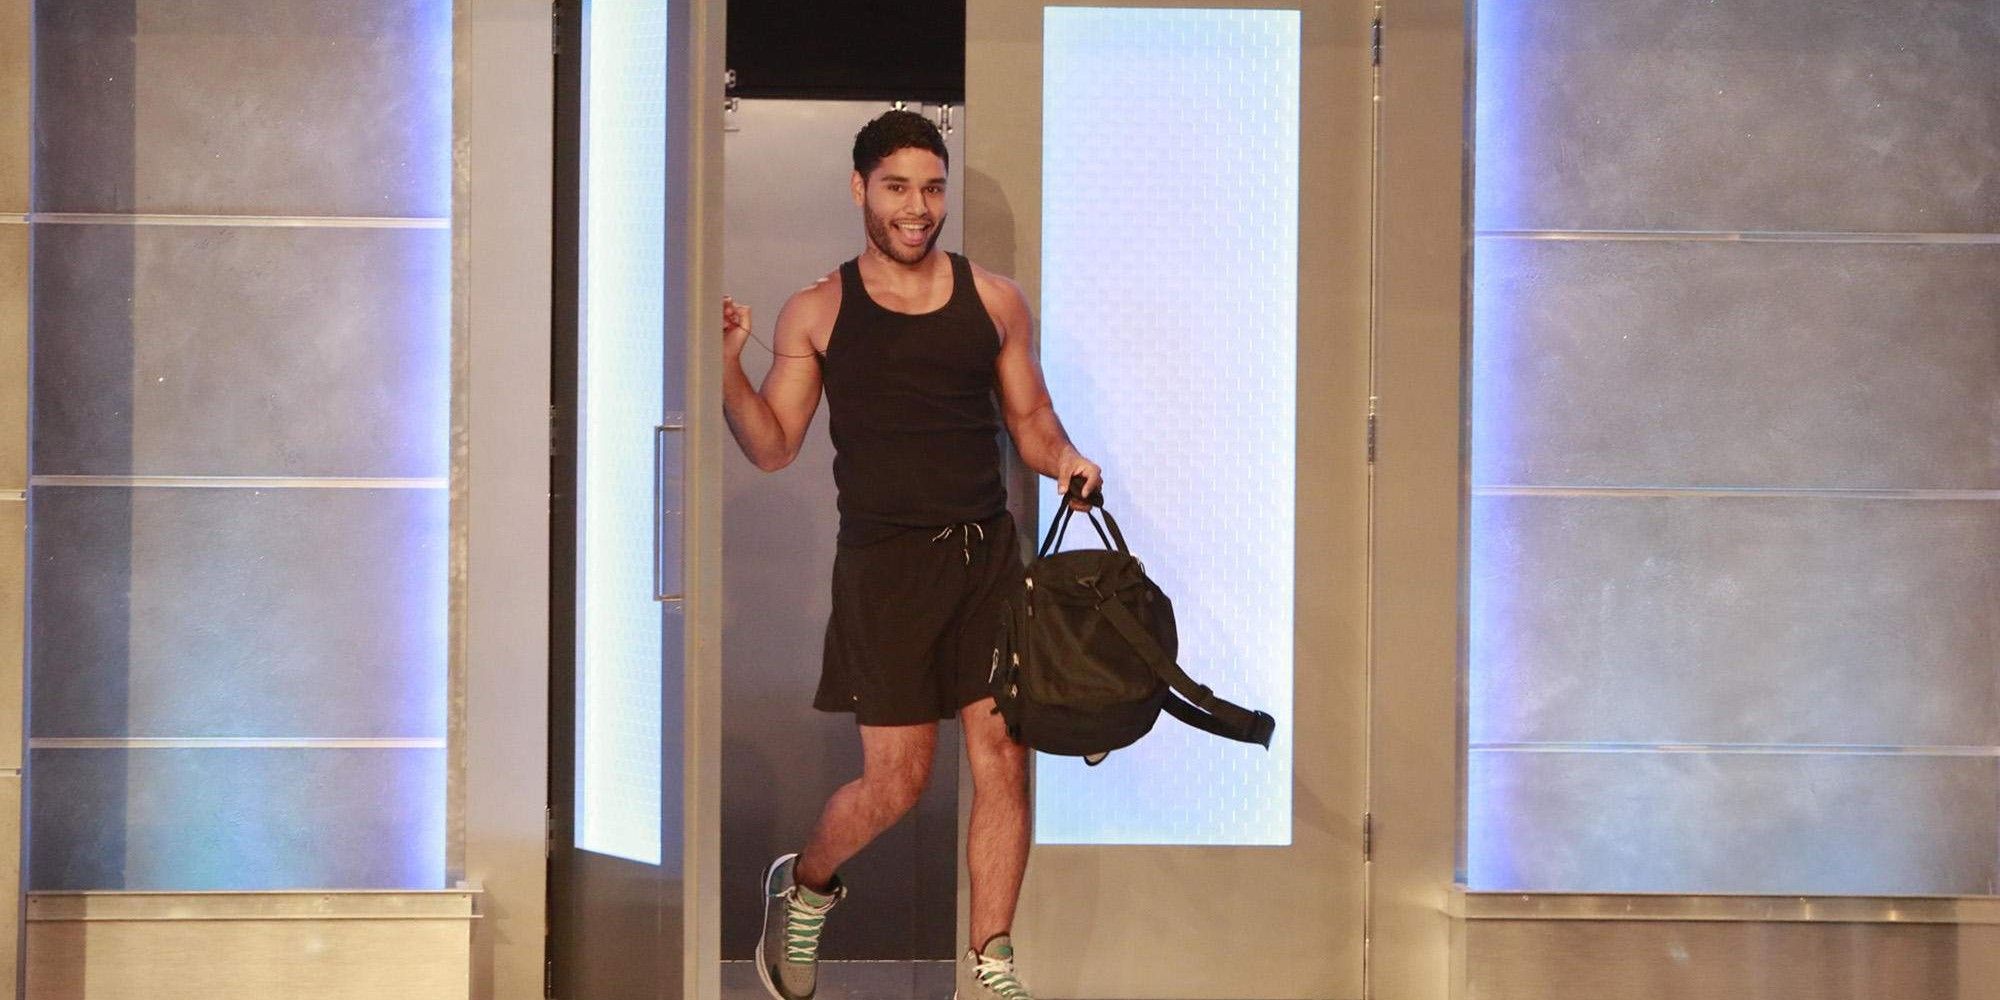 Jozea Flores exits the Big Brother house